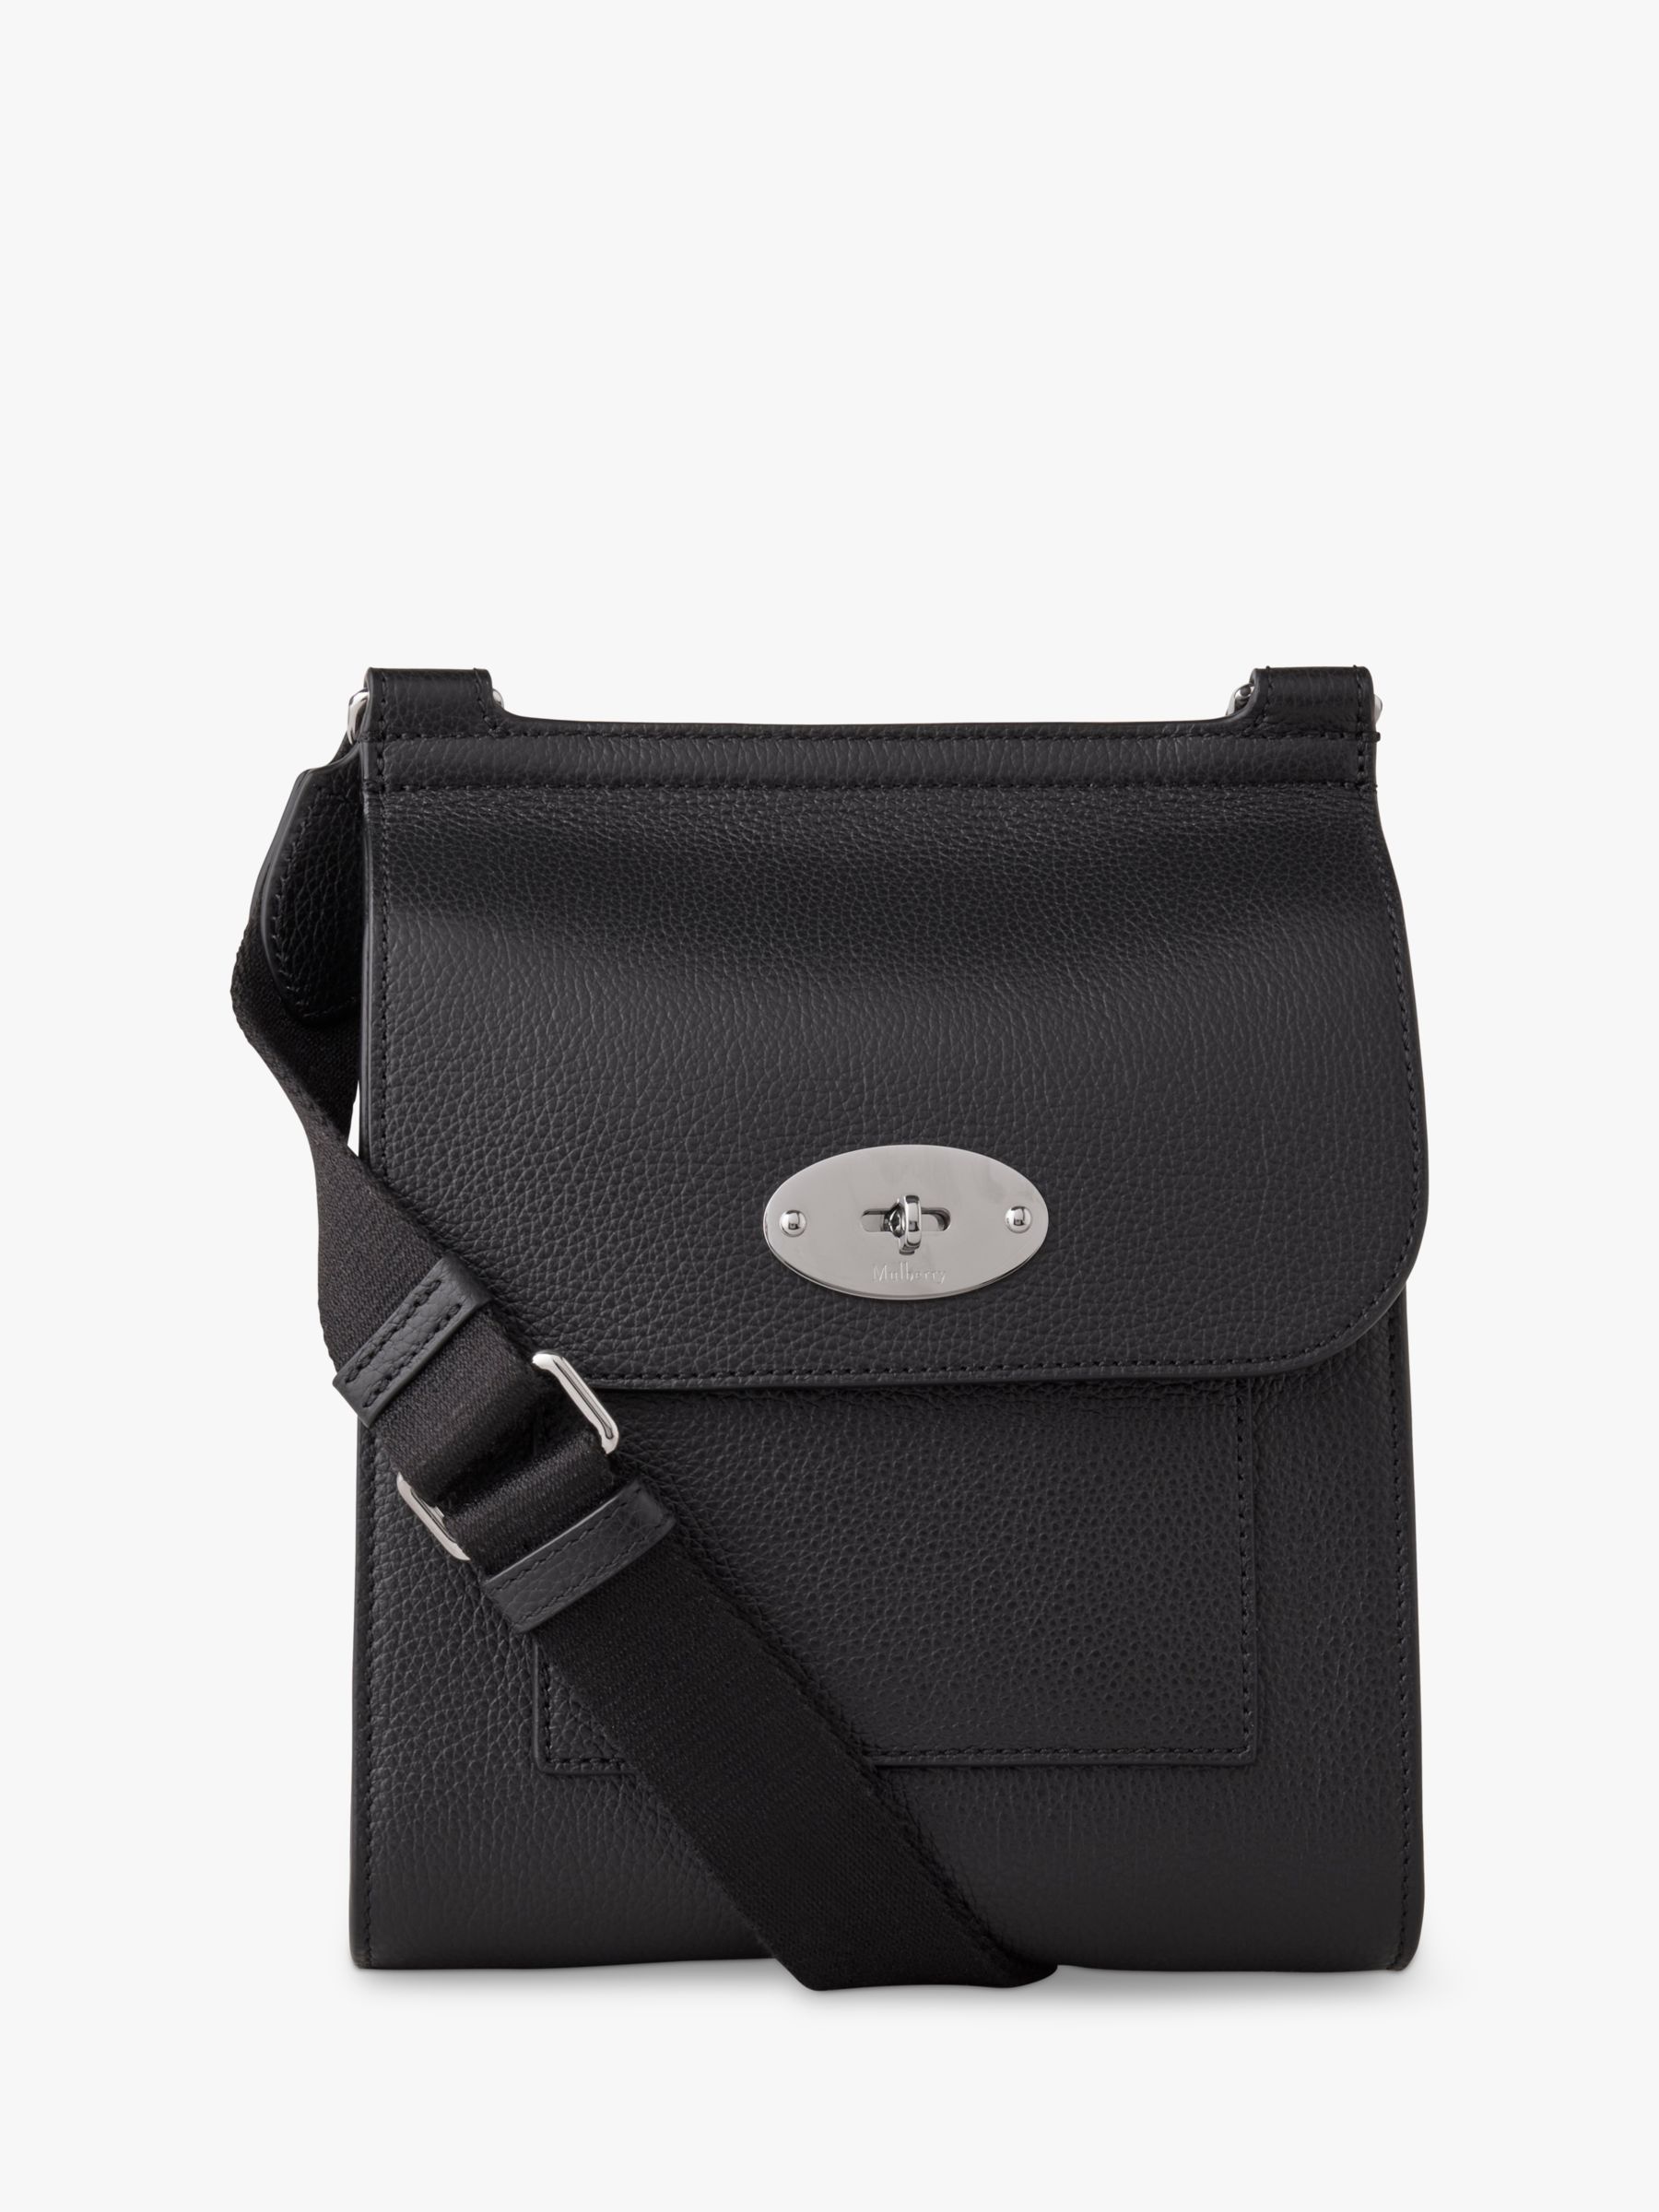 Mulberry Small Antony Classic Grain Leather Satchel, Black/Silver at ...